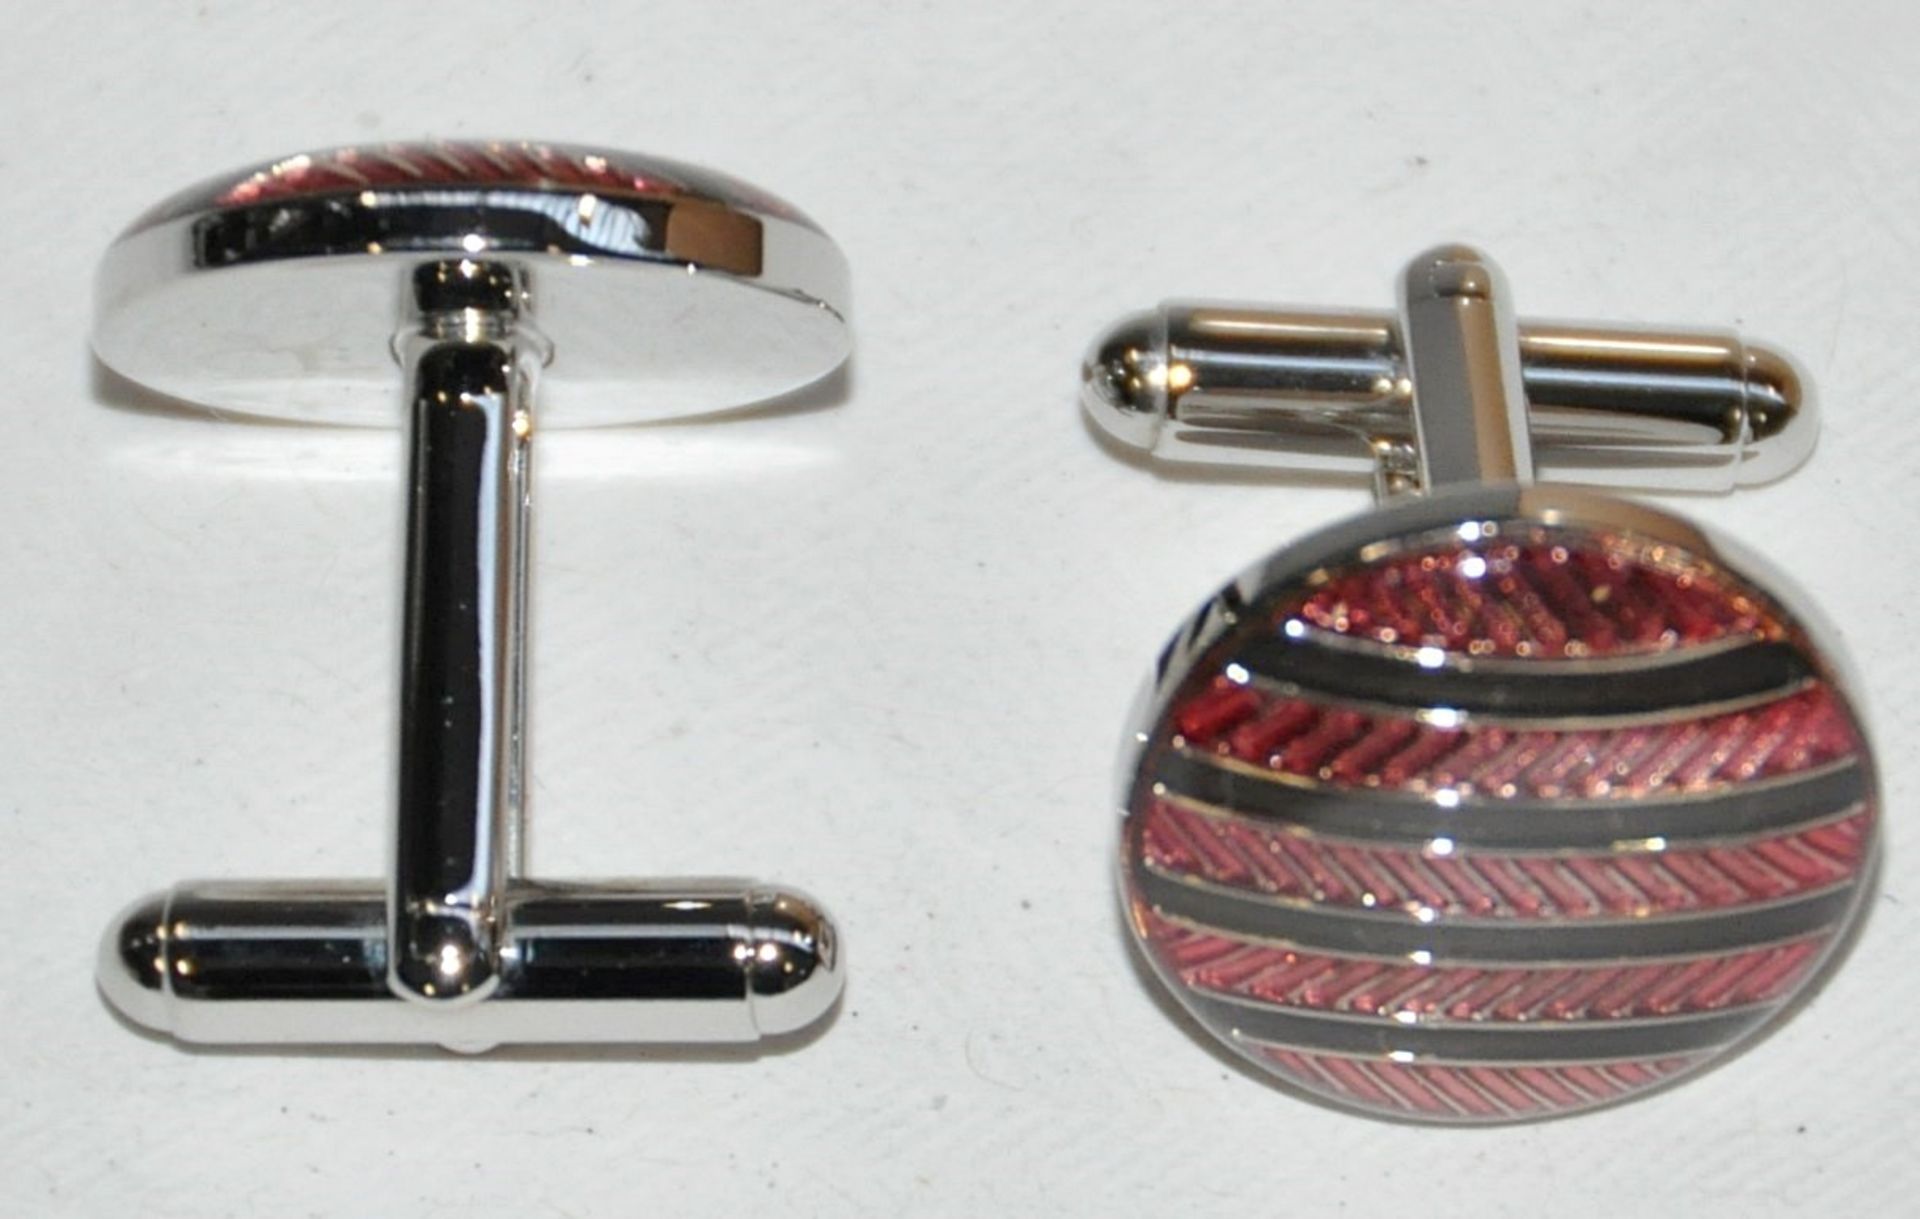 50 x Pairs of Genuine “Circle, Stripe” Enamel CUFFLINKS by Ice London – Silver Plated, 2 Colours - Image 2 of 3